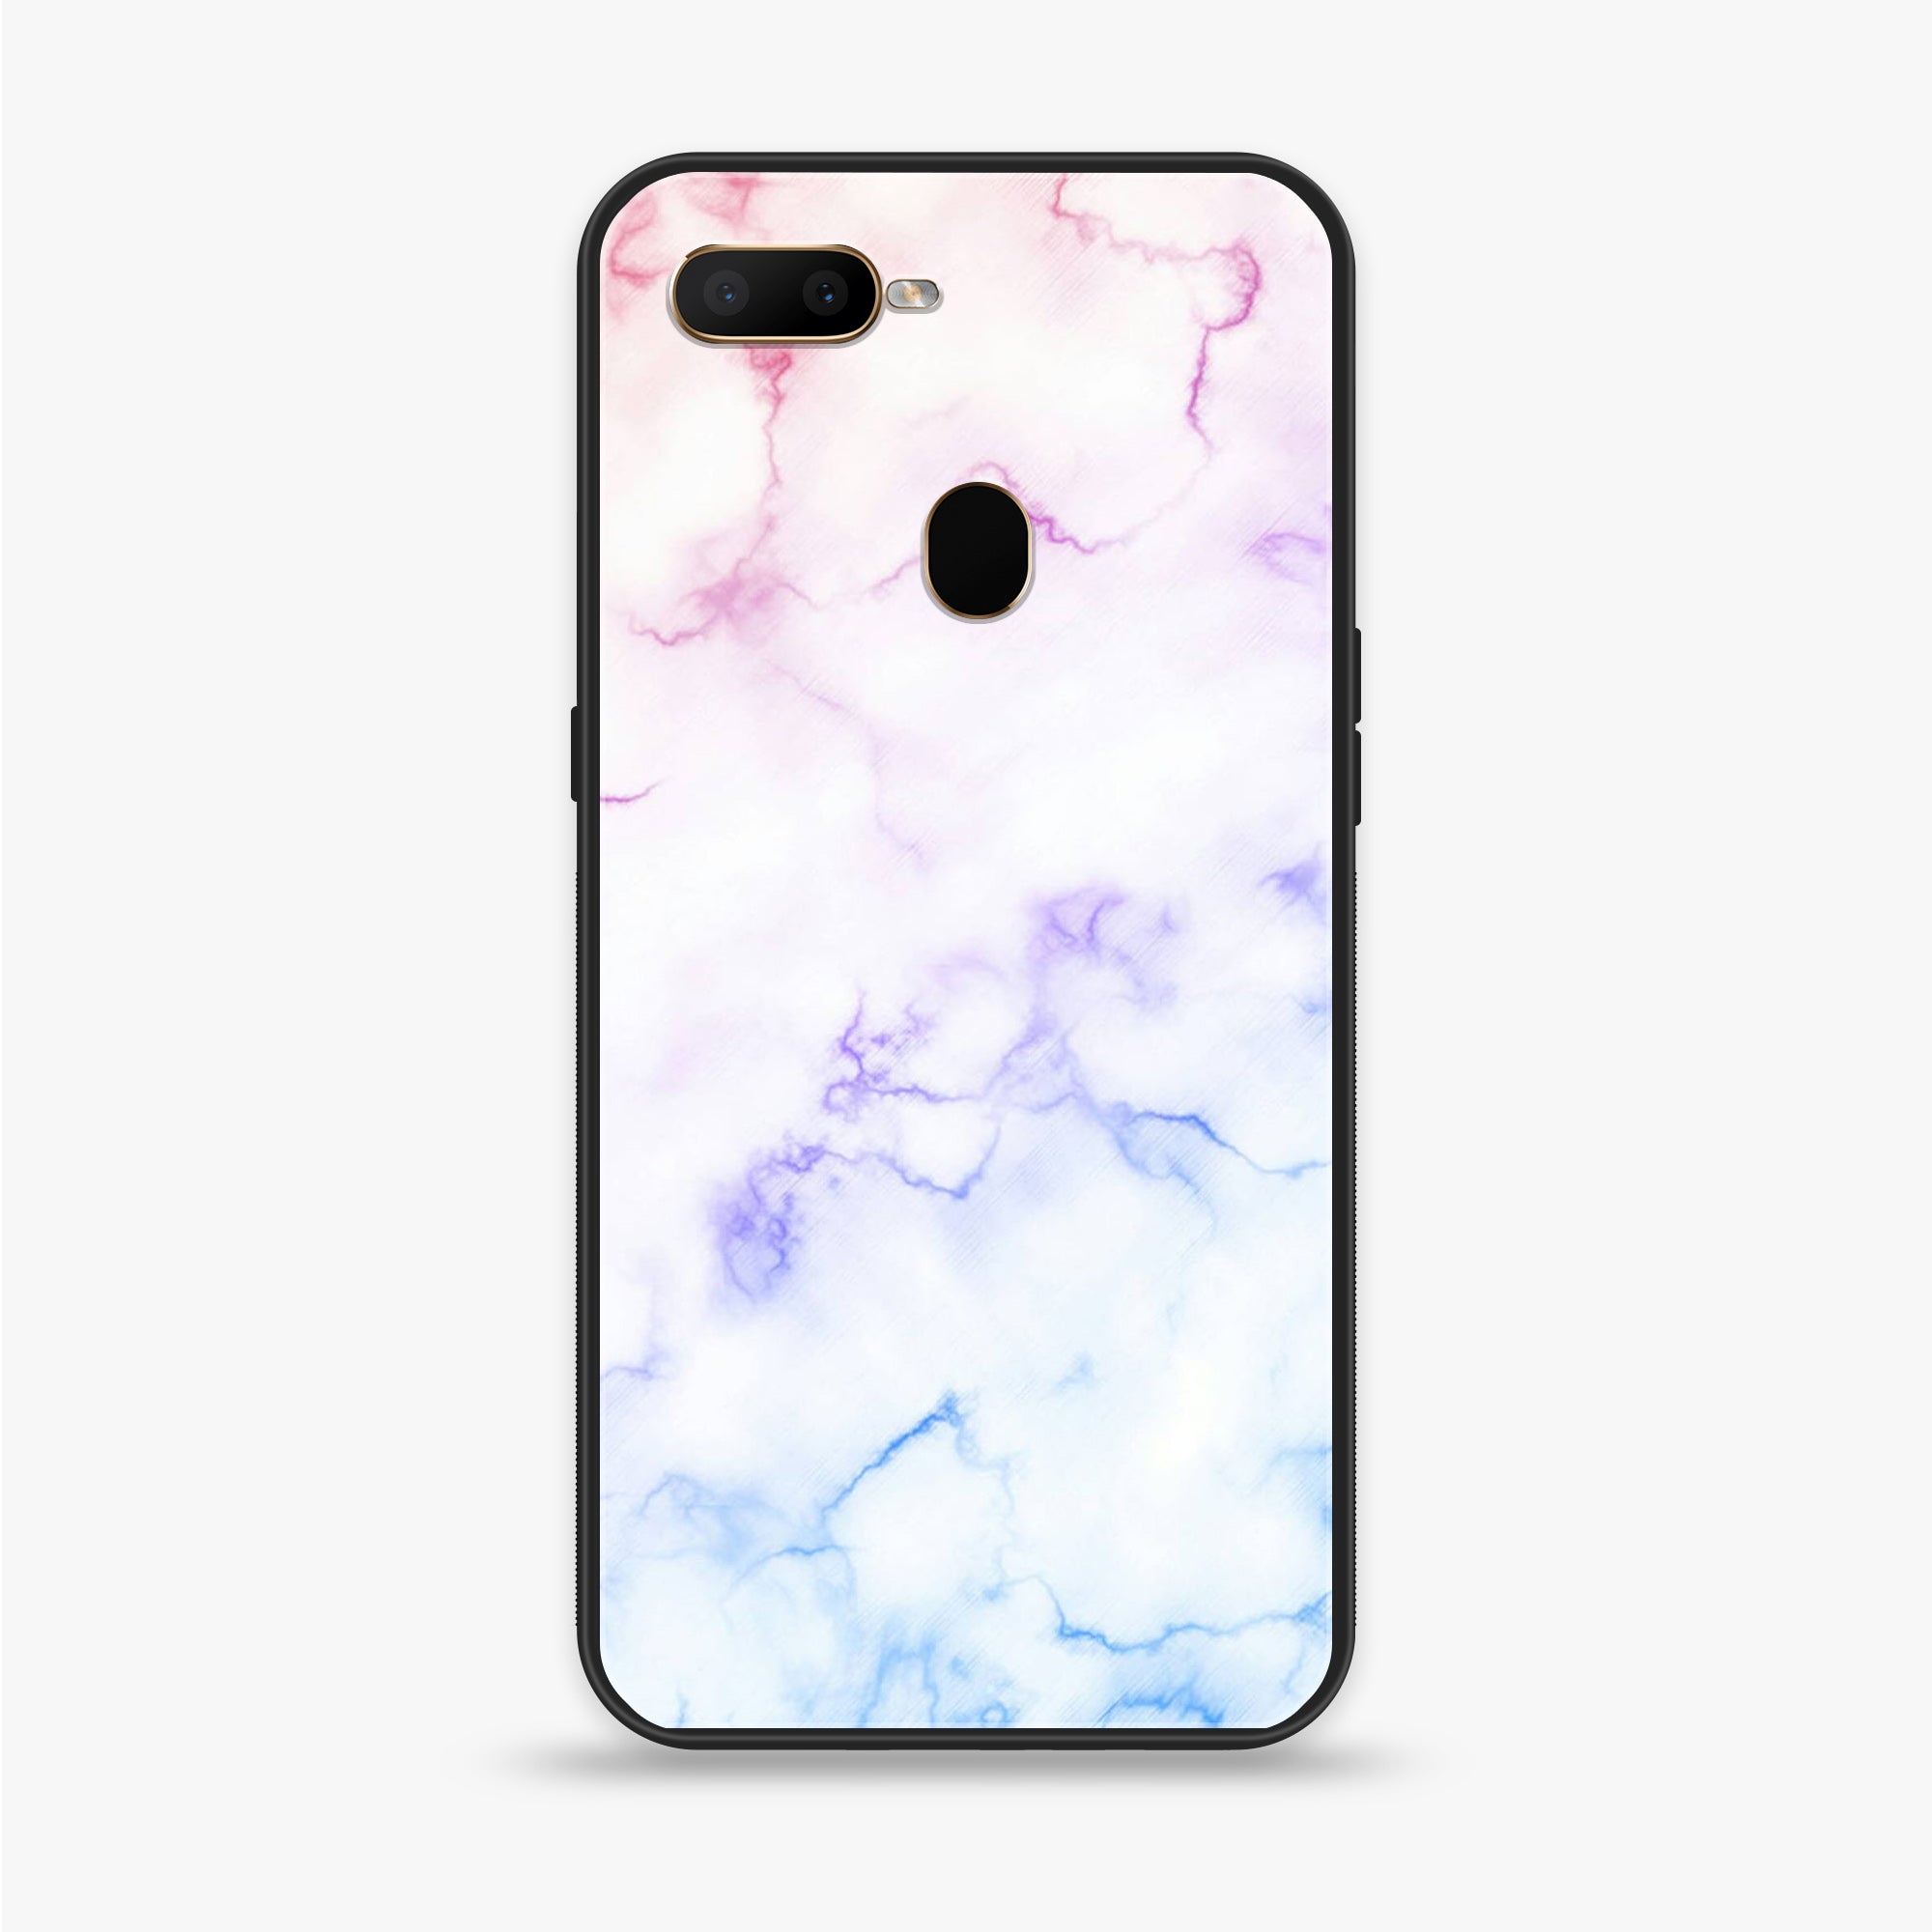 OPPO A5s - White Marble Series - Premium Printed Glass soft Bumper shock Proof Case